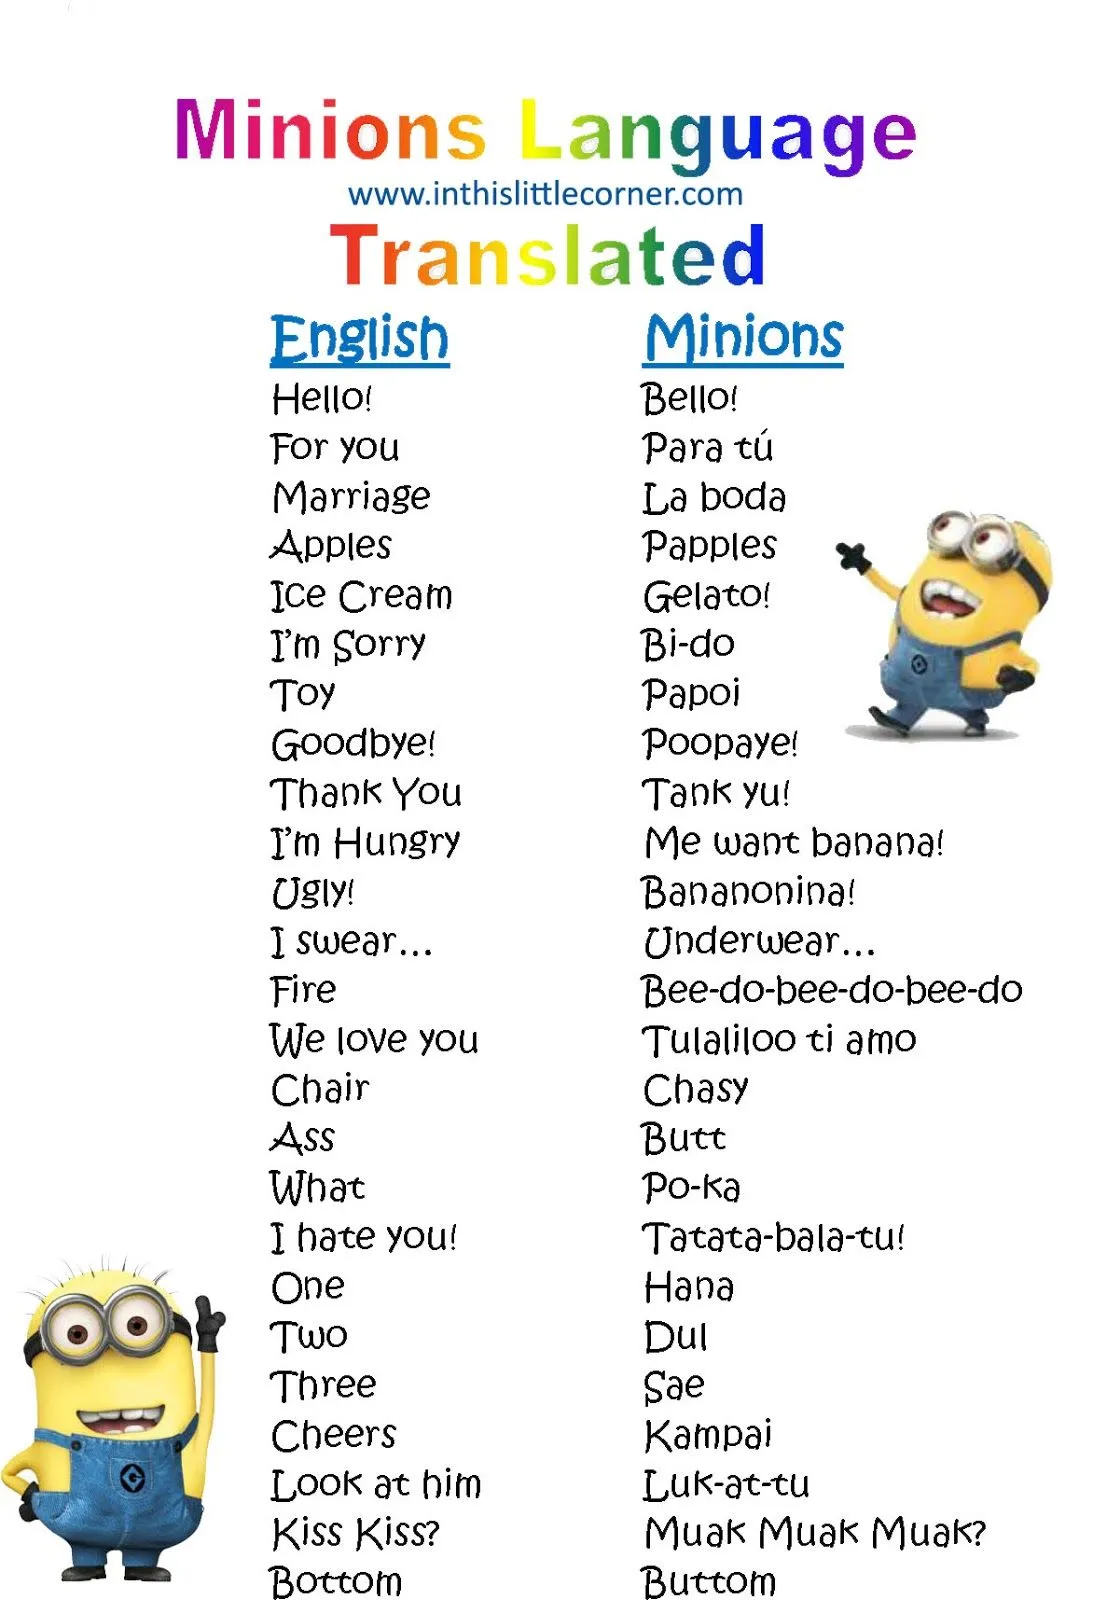 In this little corner: Minion Language Translated - Despicable Me